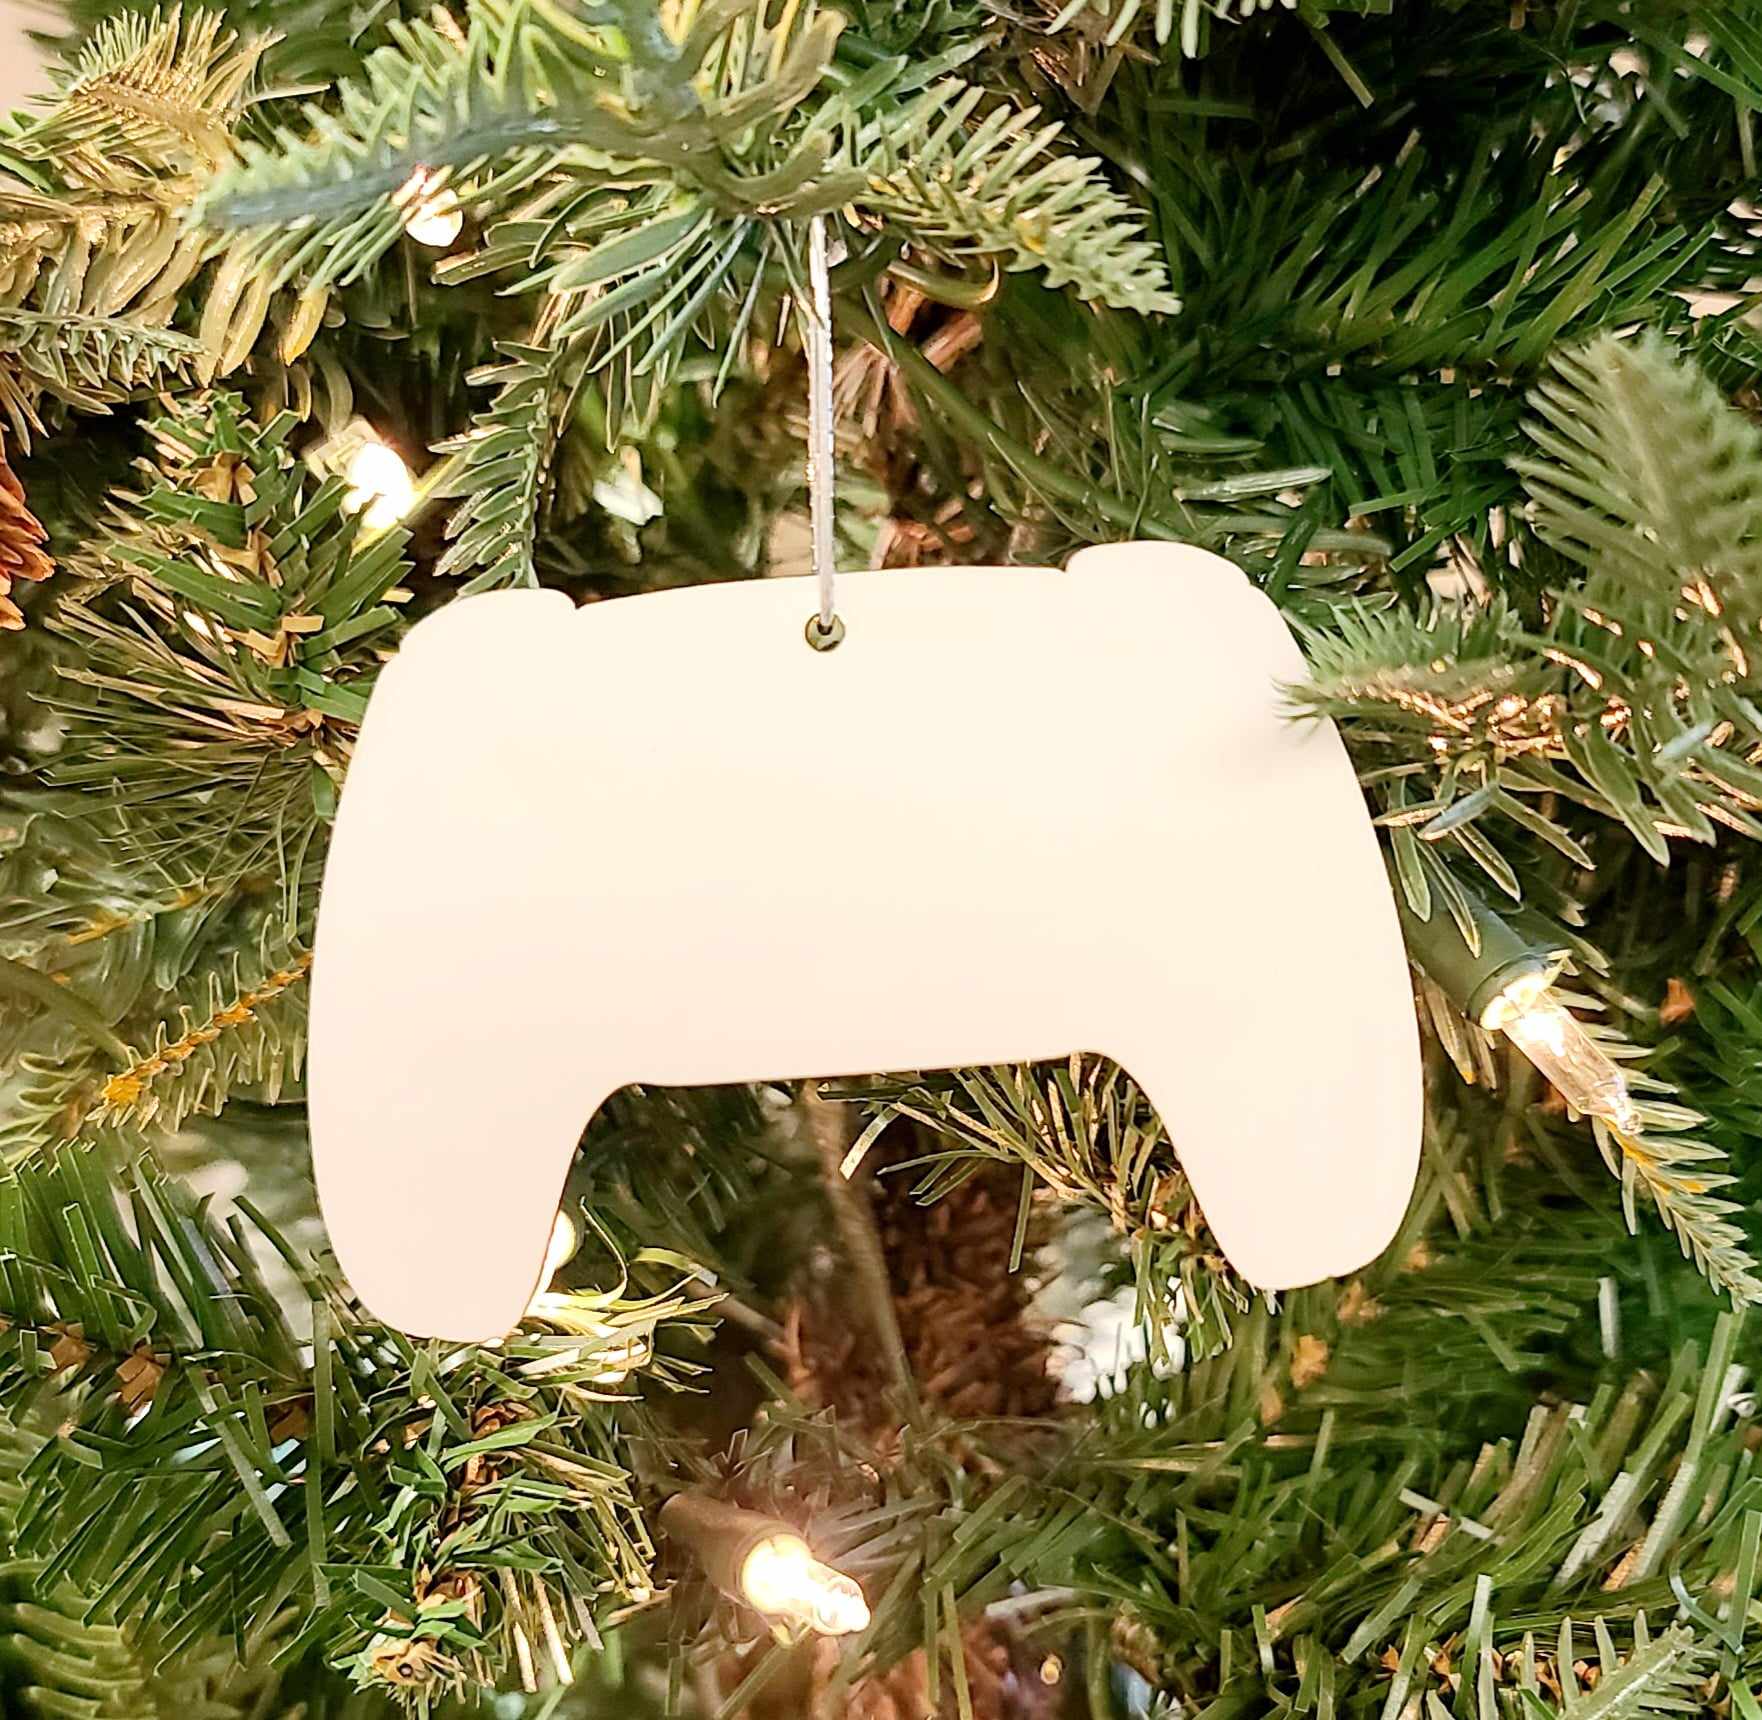 Game Controller Ornaments